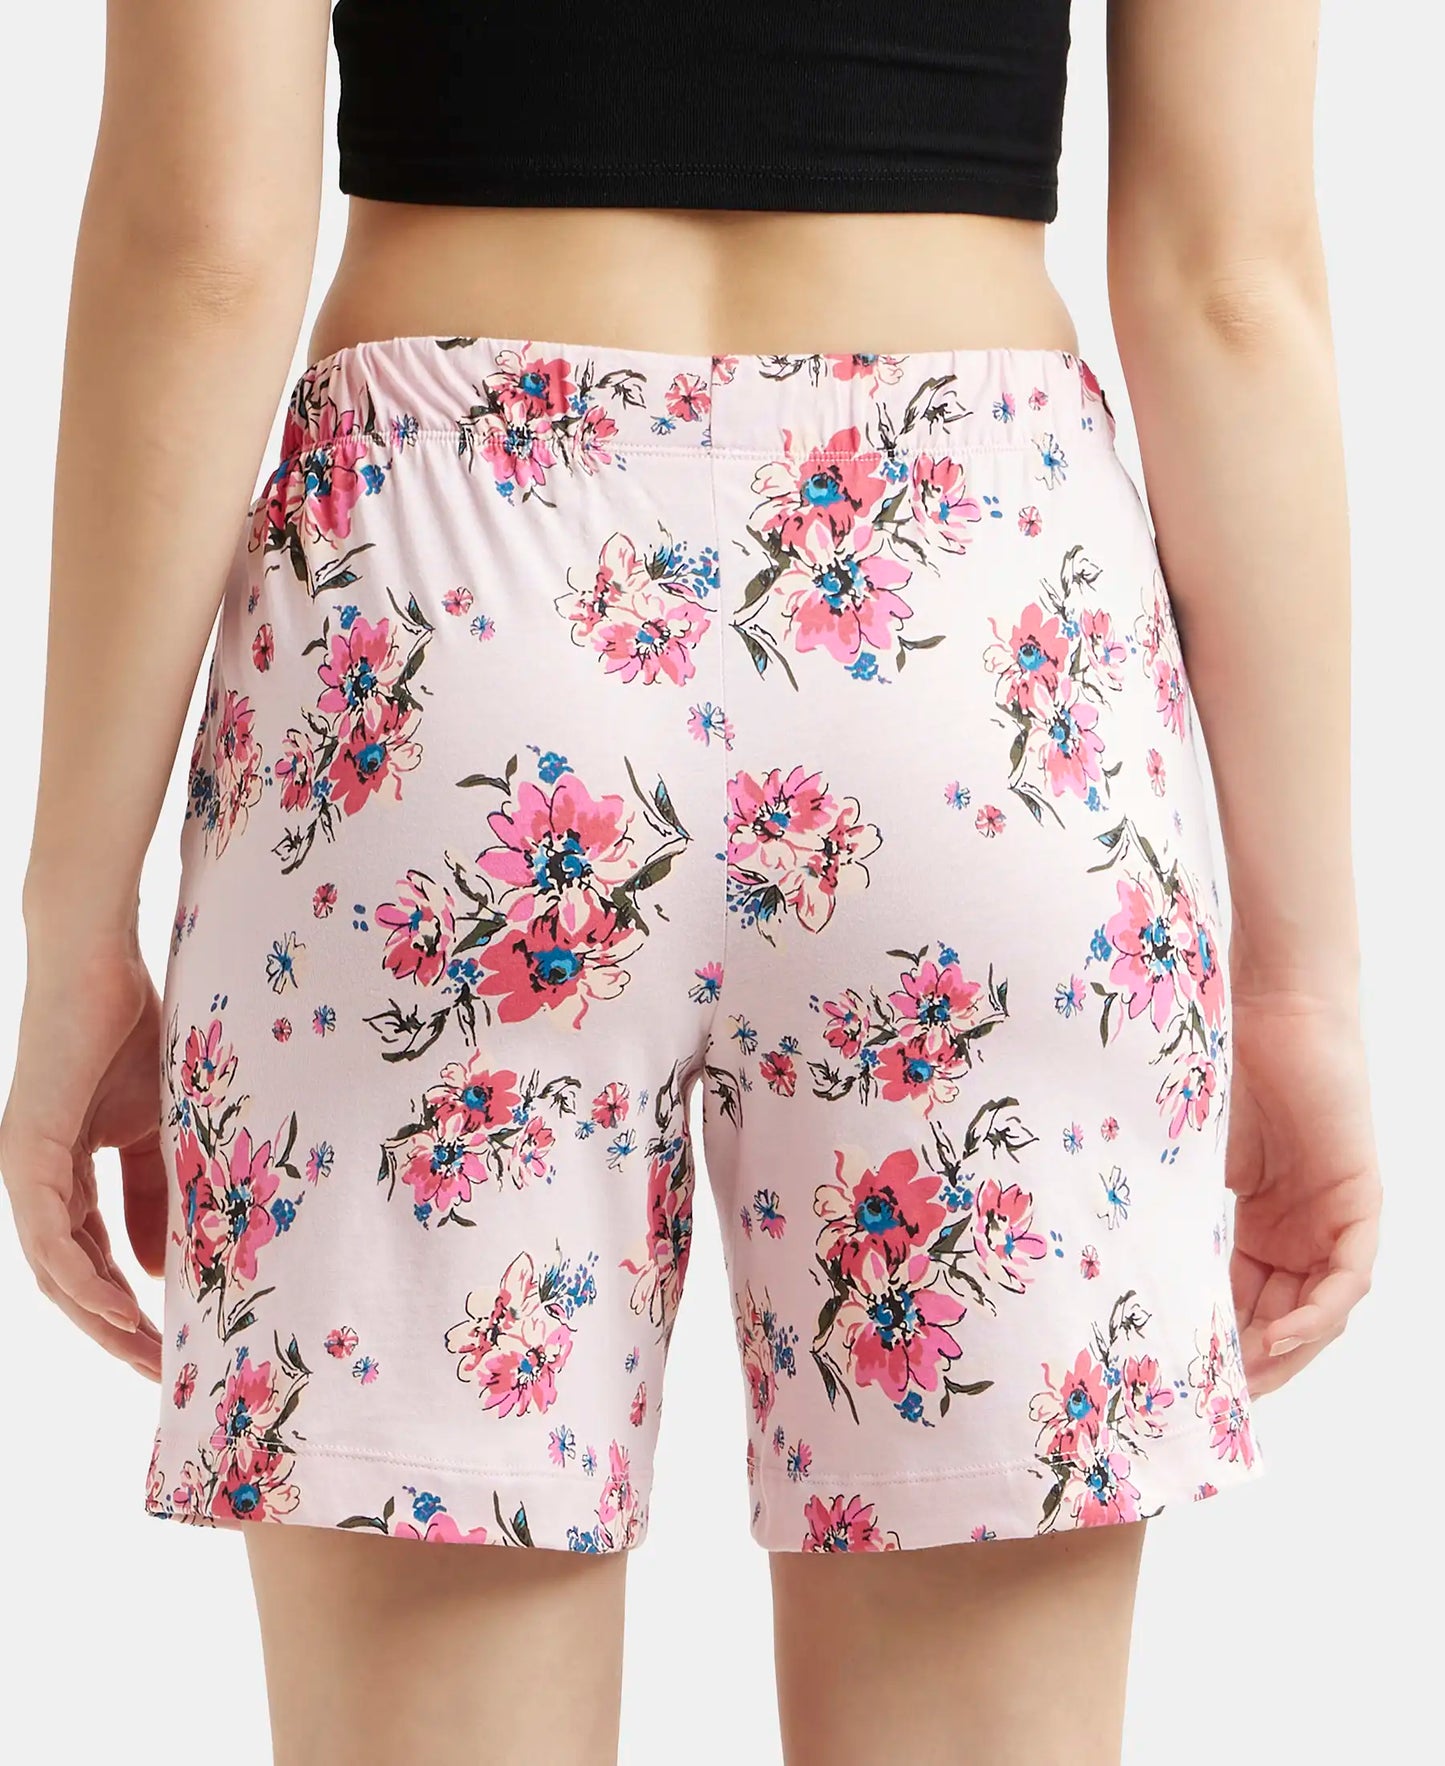 Super Combed Cotton Relaxed Fit Printed Shorts with Convenient Side Pockets - Orchid Pink-3